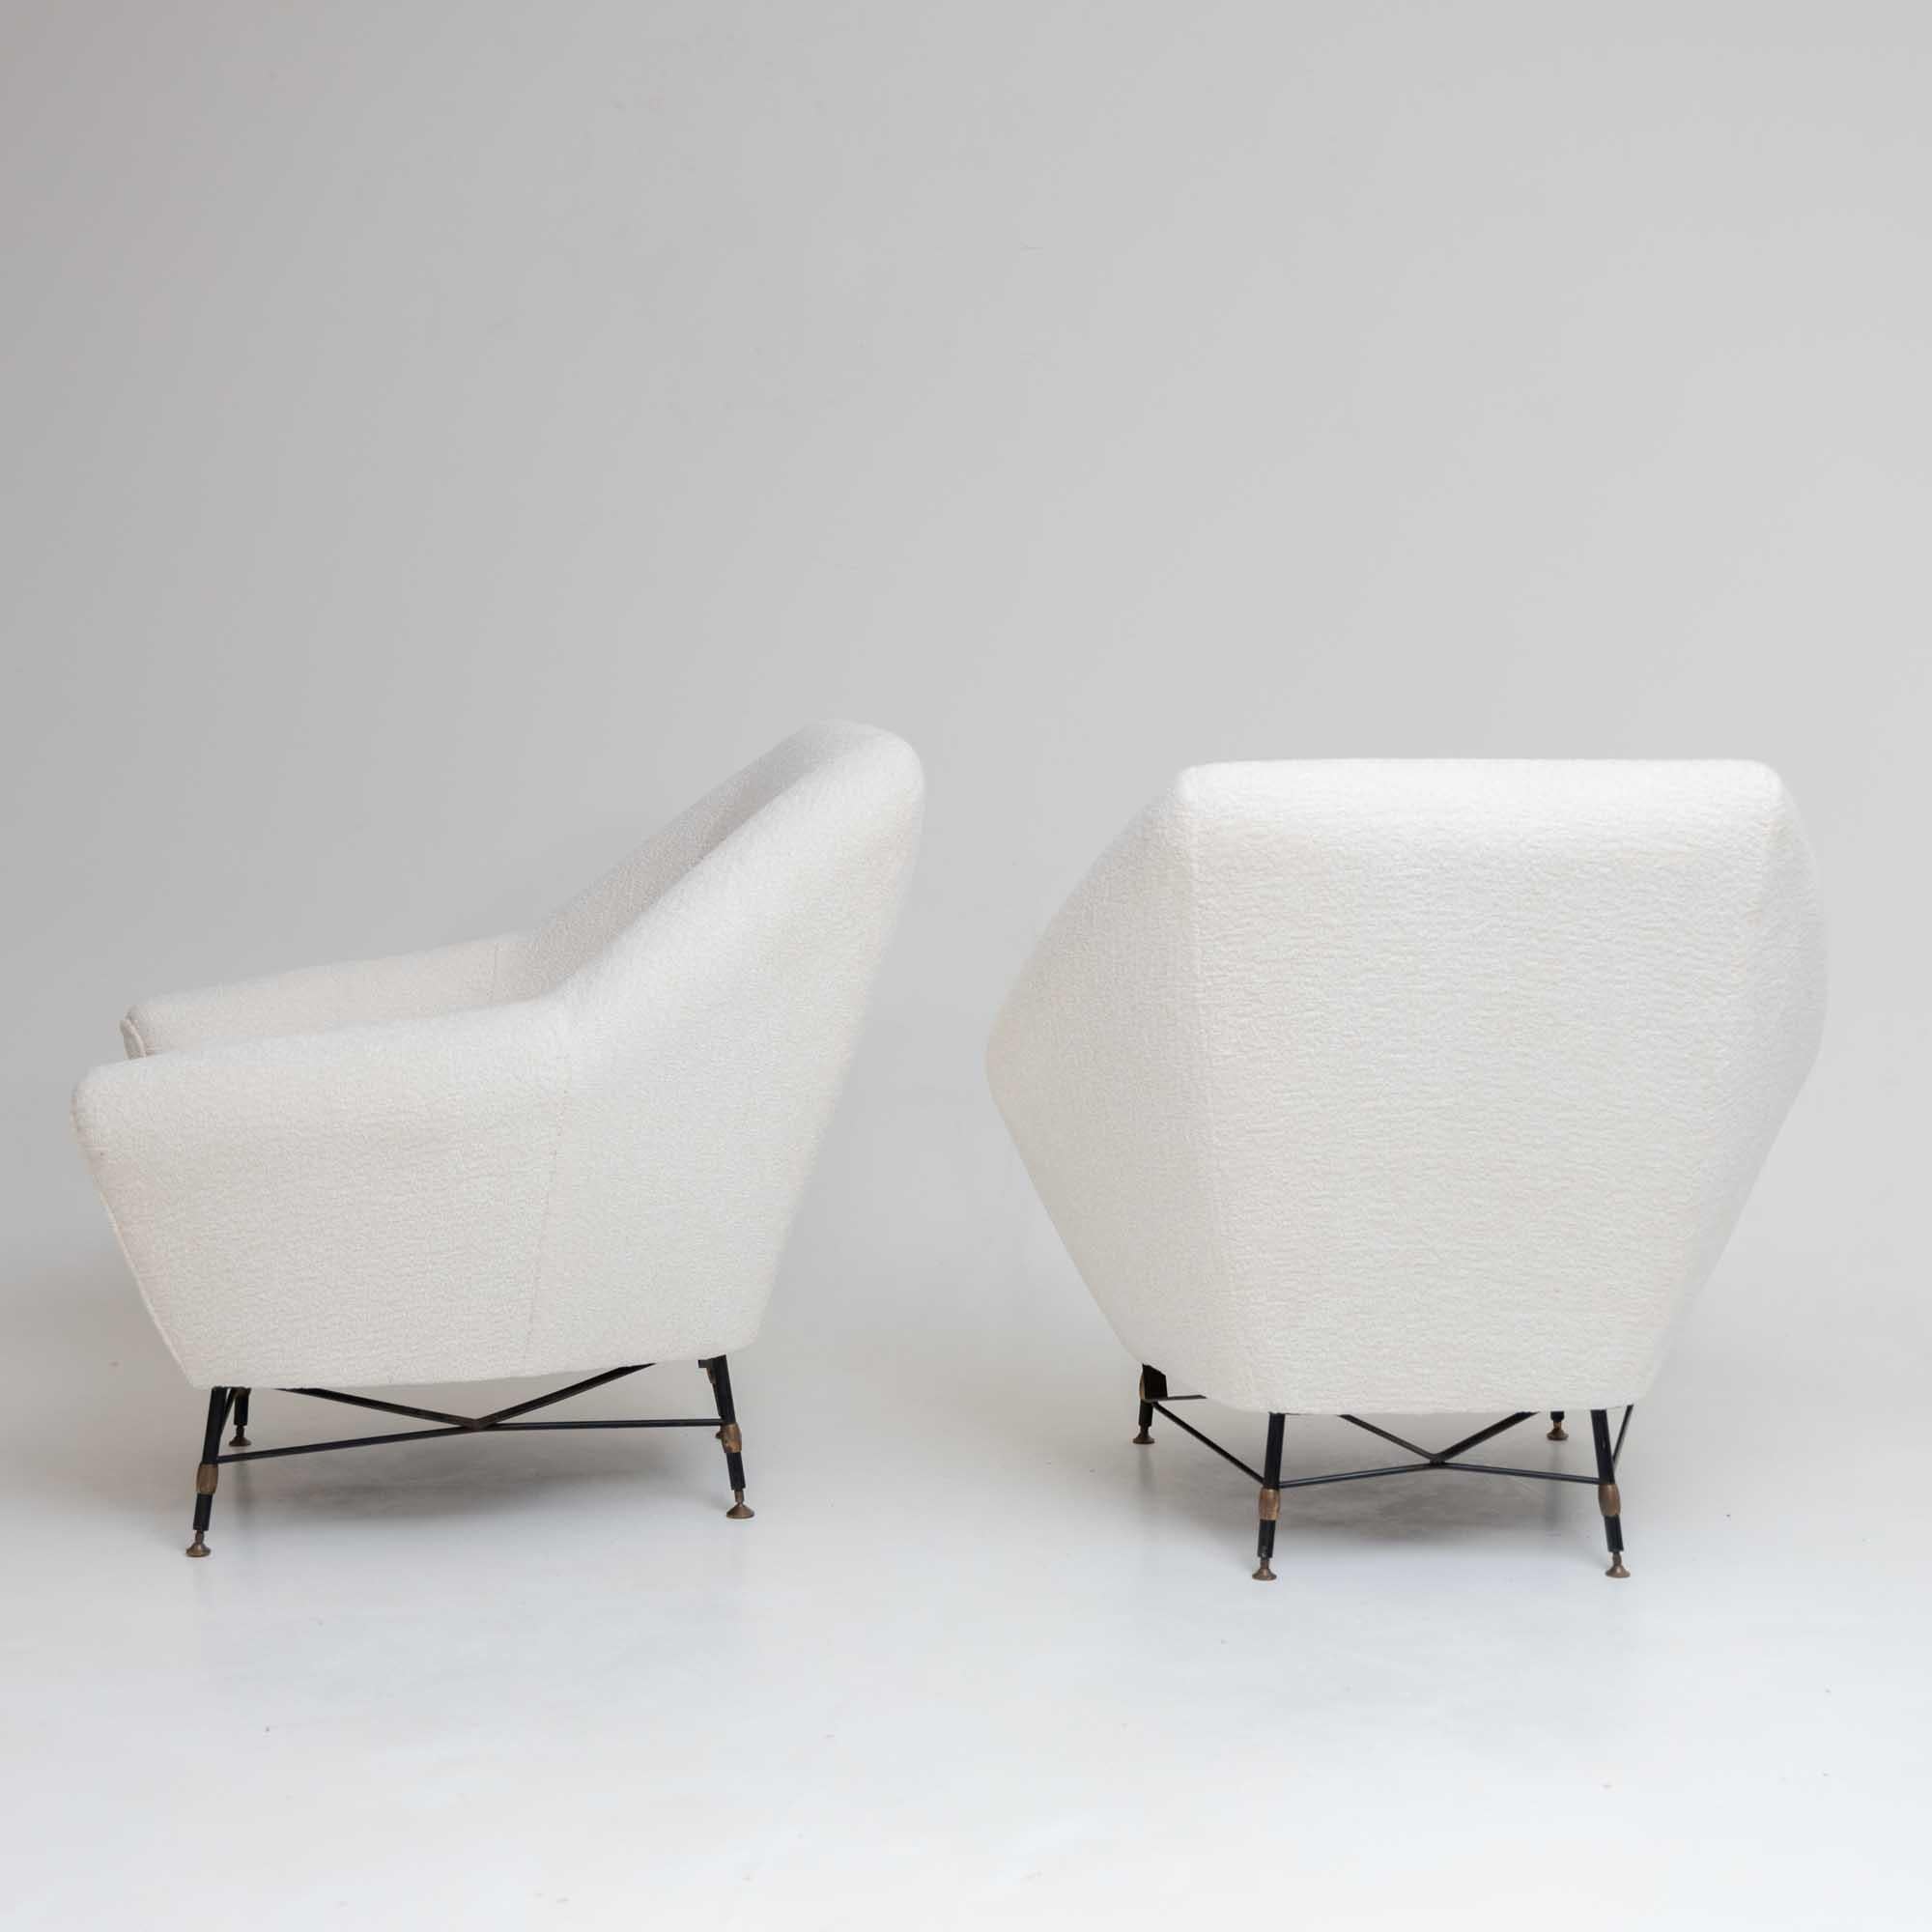 This duo of generously cushioned lounge chairs features elegantly shaped iron frames, offering a perfect blend of comfort and style. Recently reupholstered with a chic white bouclé fabric, these chairs bring a touch of modern sophistication to any